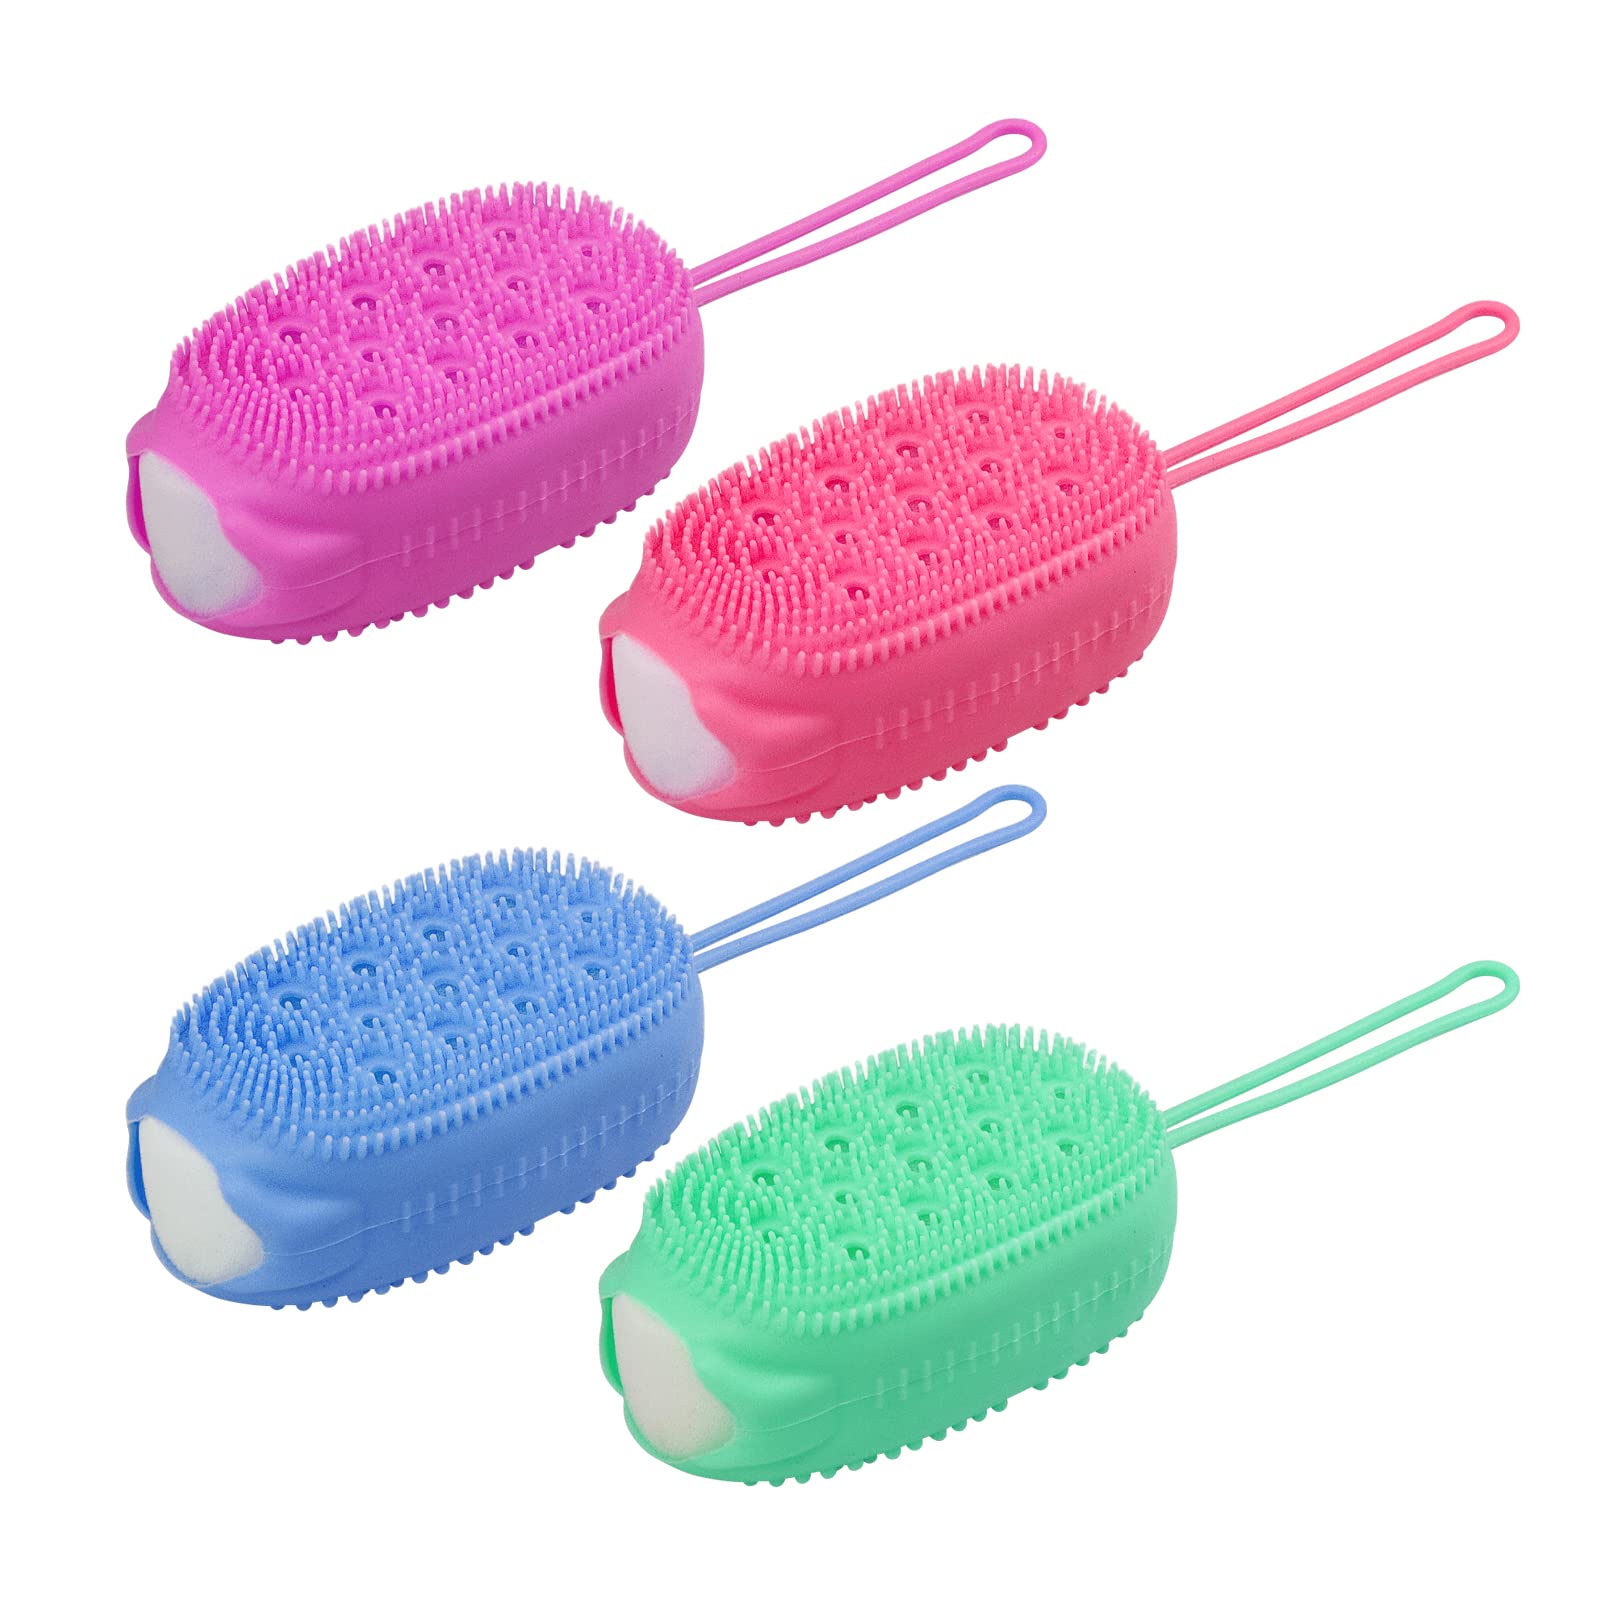 Silicone Shower Brush Silicone Body Brush Shower Scrubber with